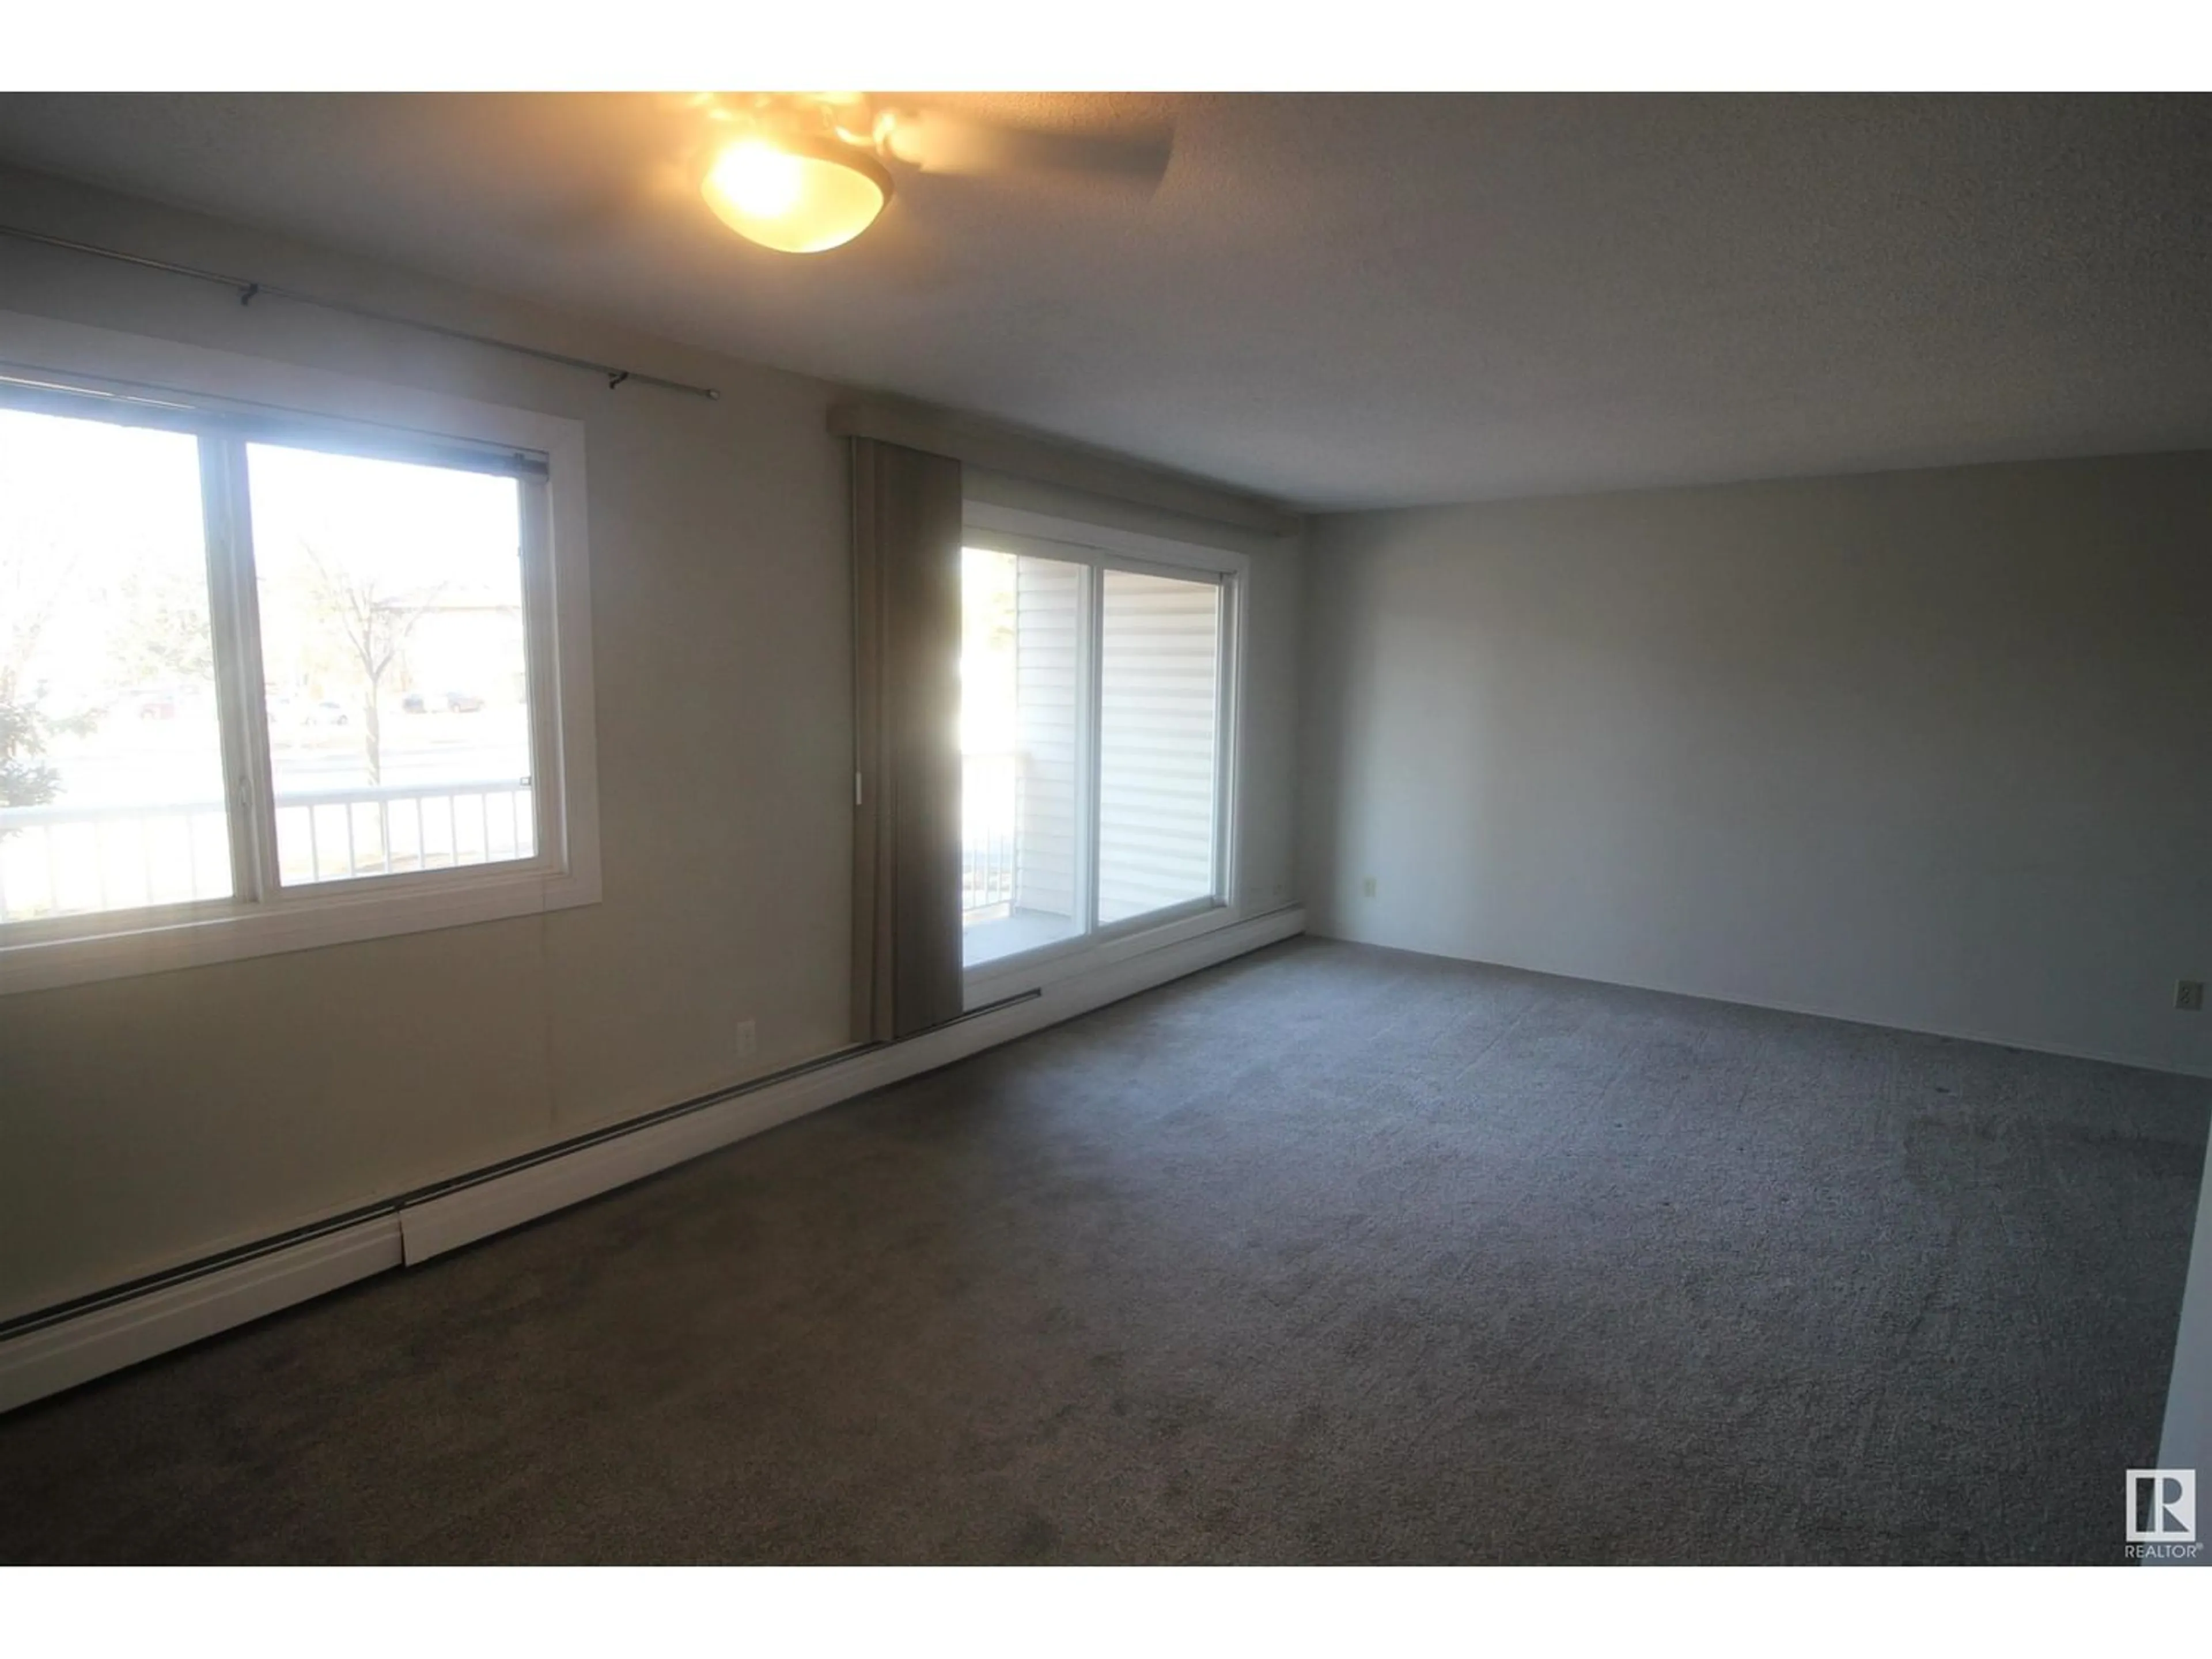 A pic of a room for #223 5125 RIVERBEND RD NW, Edmonton Alberta T6H5K5